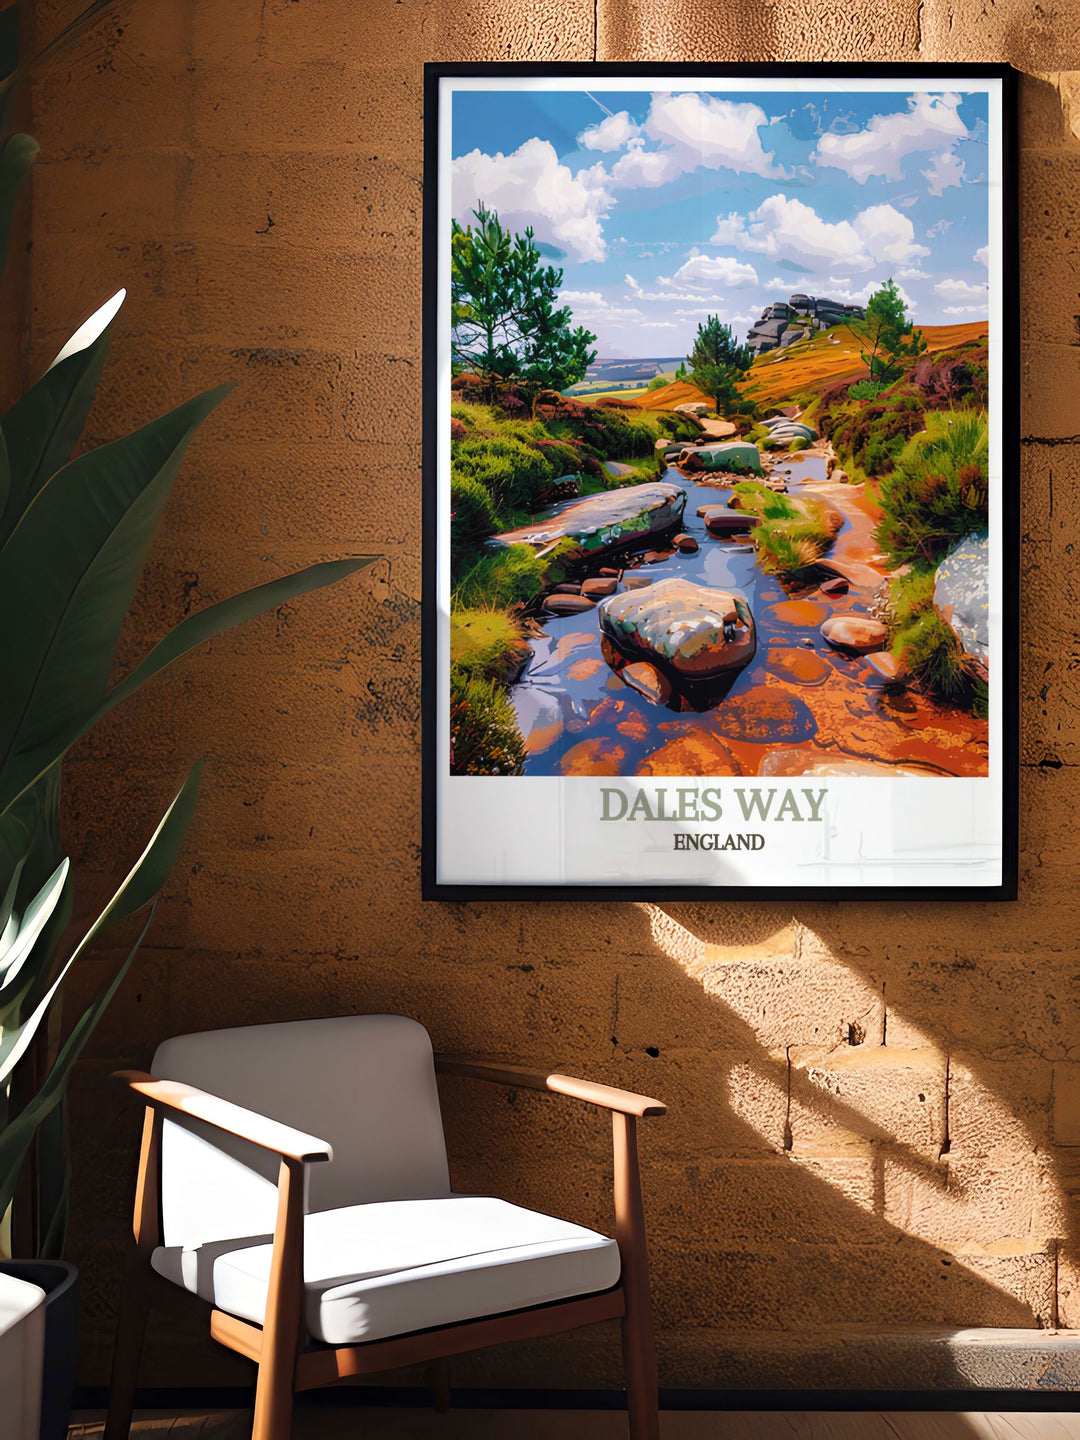 Custom print featuring unique perspectives of Ilkley Moors wild beauty, capturing the essence of North Yorkshires natural landscapes.